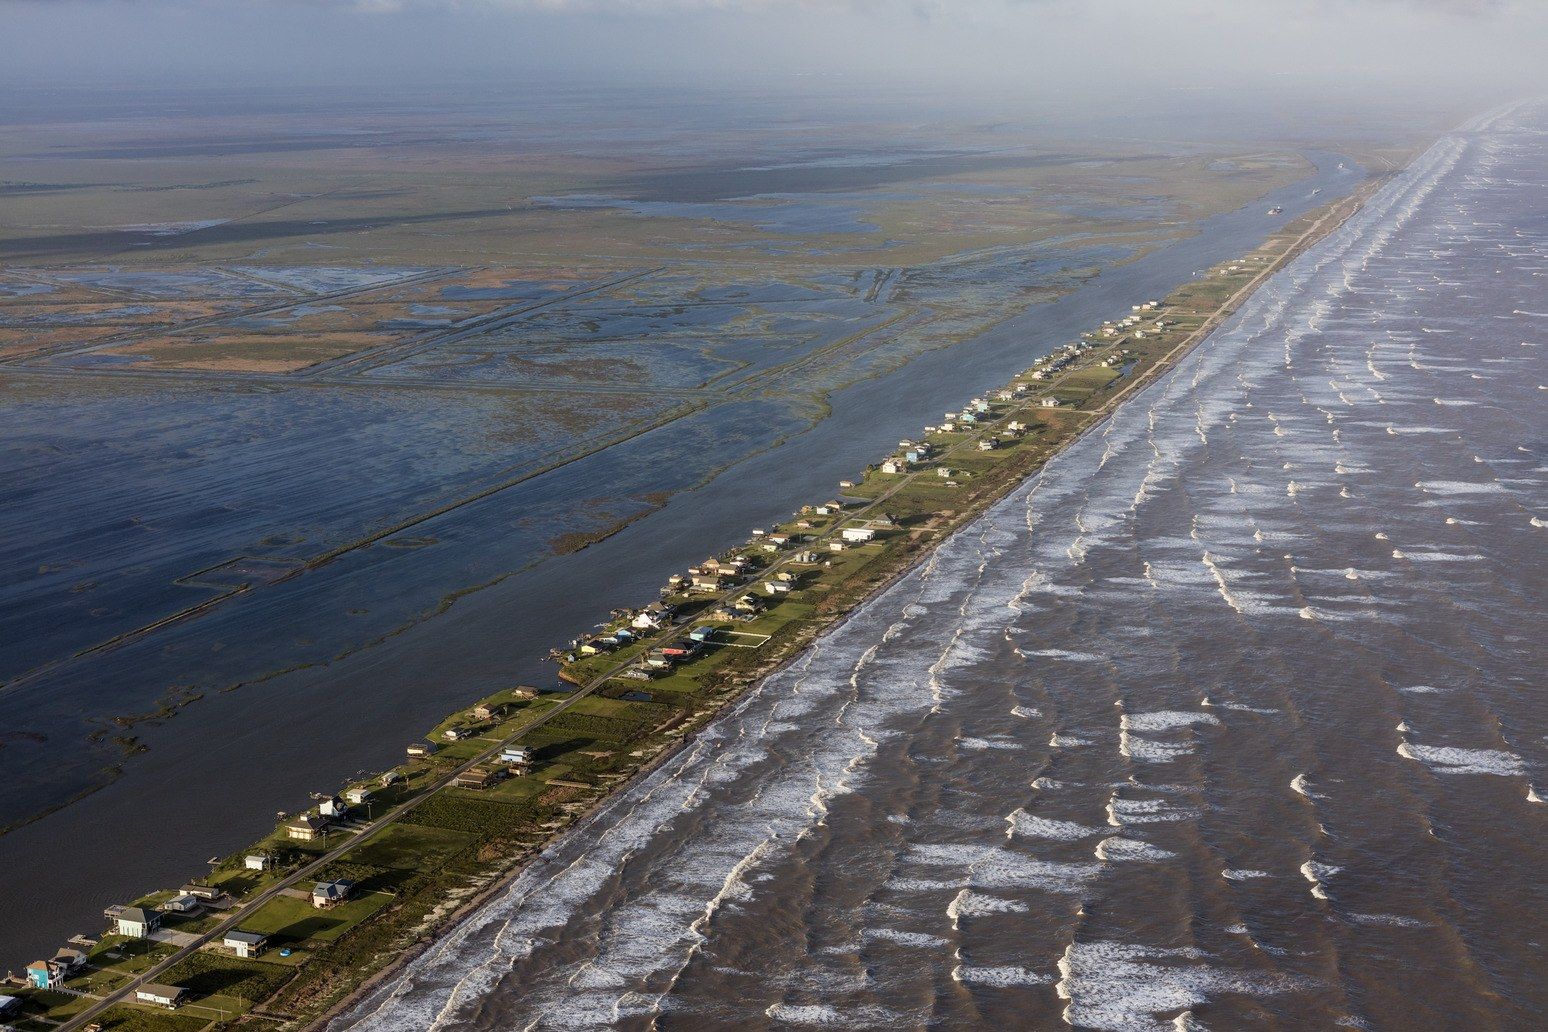 In Bay City, located between the Gulf of Mexico and the Intercoastal Waterway, building codes require new homes to be built thirteen feet above mean sea level—but that rule won’t prevent damage from a direct hit by a storm and, with sea level rise, will become less effective every year. Image by Alex MacLean. Unites States, 2017.